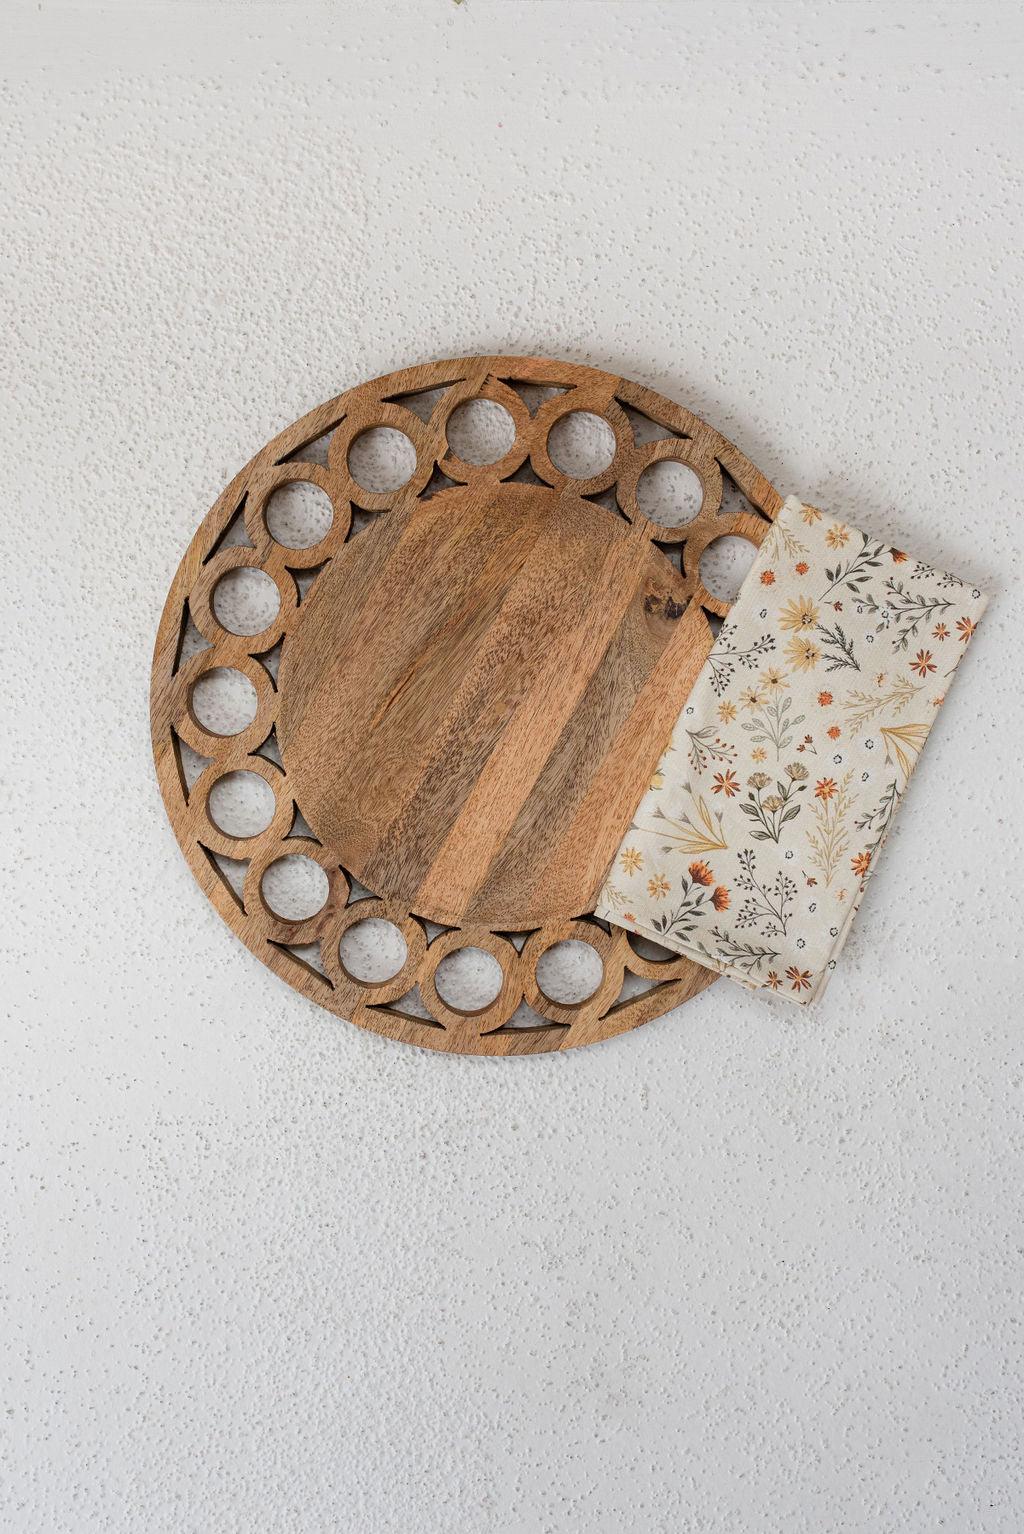 wooden circle charger centered on white texured surface with fall meadow napkin folded overlapping charger